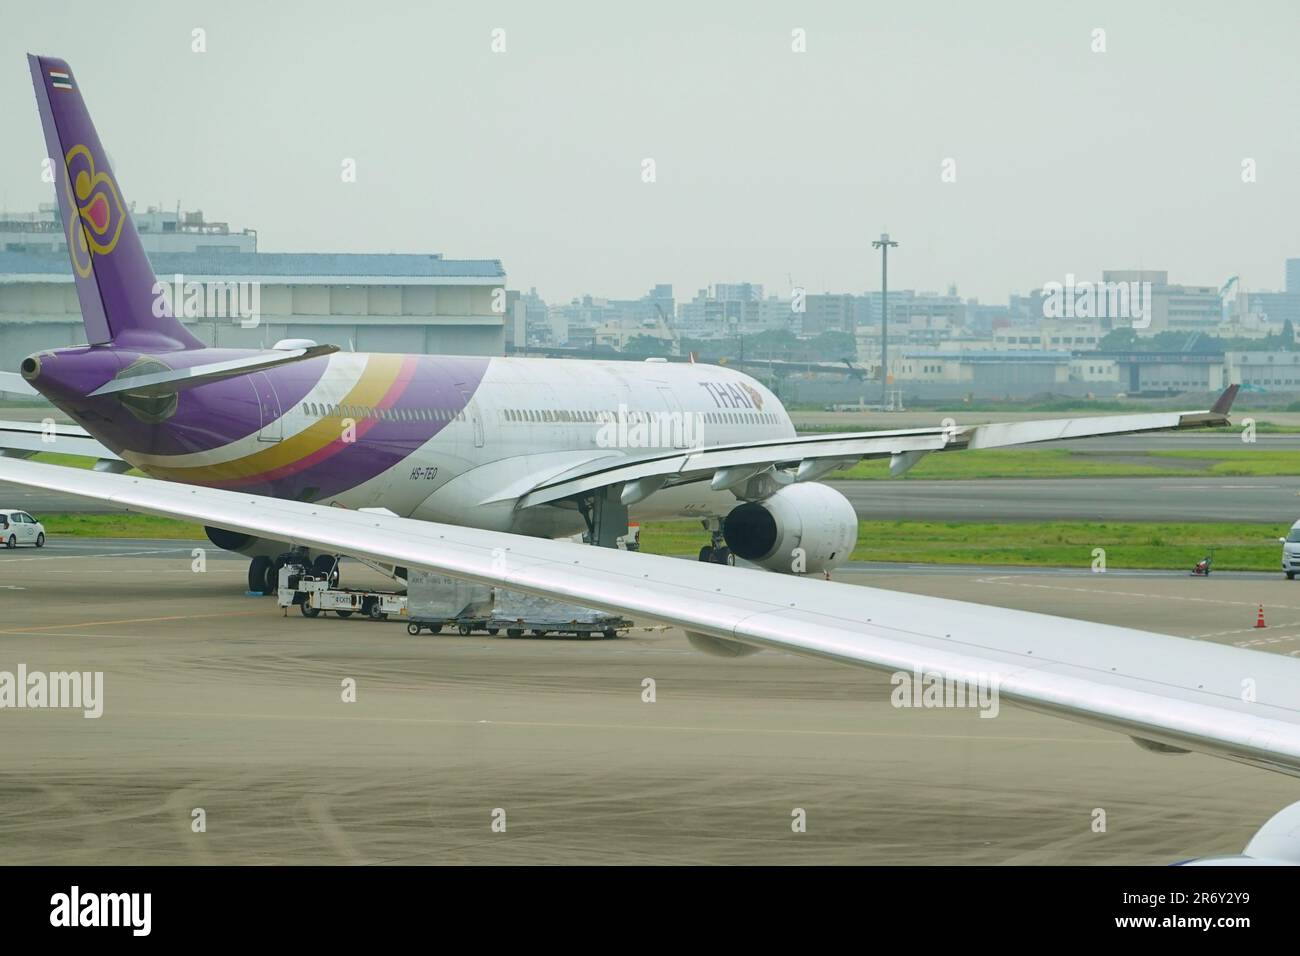 Thai Airways Flight TG683 (A330-300, Reg, HS-TEO), which collided with EVA Air Flight BR189 (A330-300, Reg. B-16340) at Haneda Airport, damaging the winglet on the right wing tip, on June 10, 2023. (Photo by Tadayuki YOSHIKAWA/Aviation Wire) Stock Photo